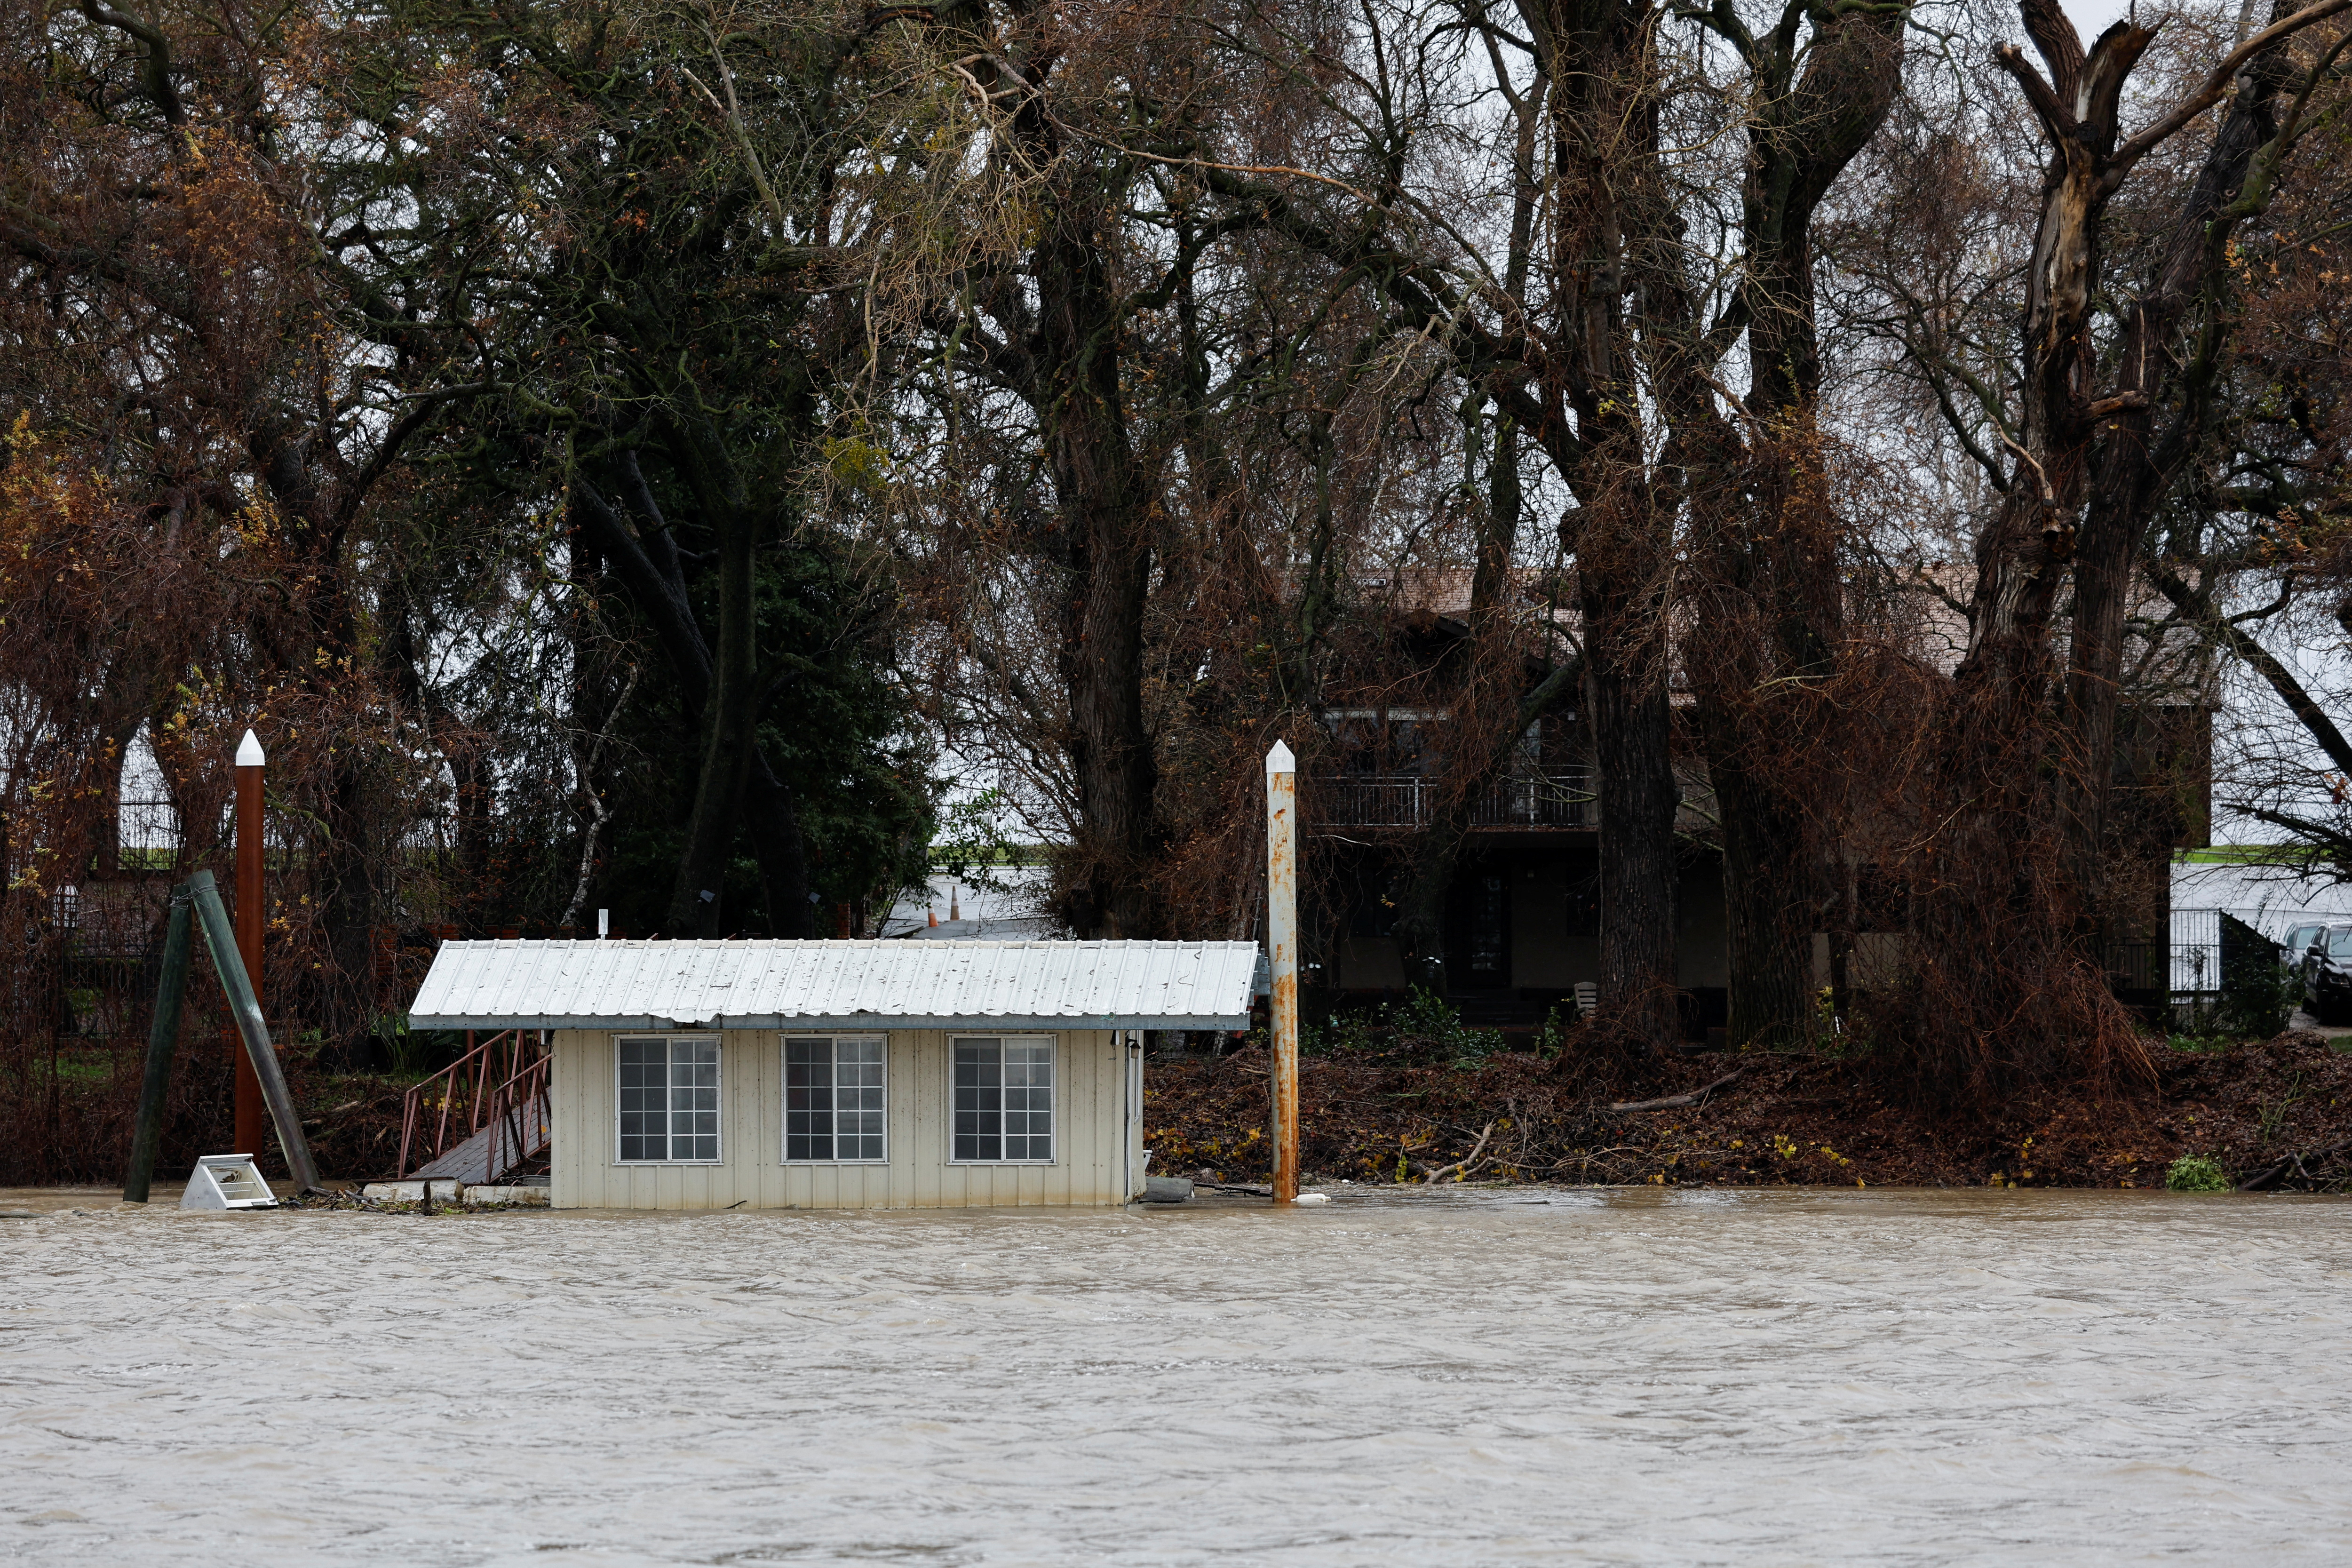 A partially submerged boathouse is seen on the Sacramento River in West Sacramento